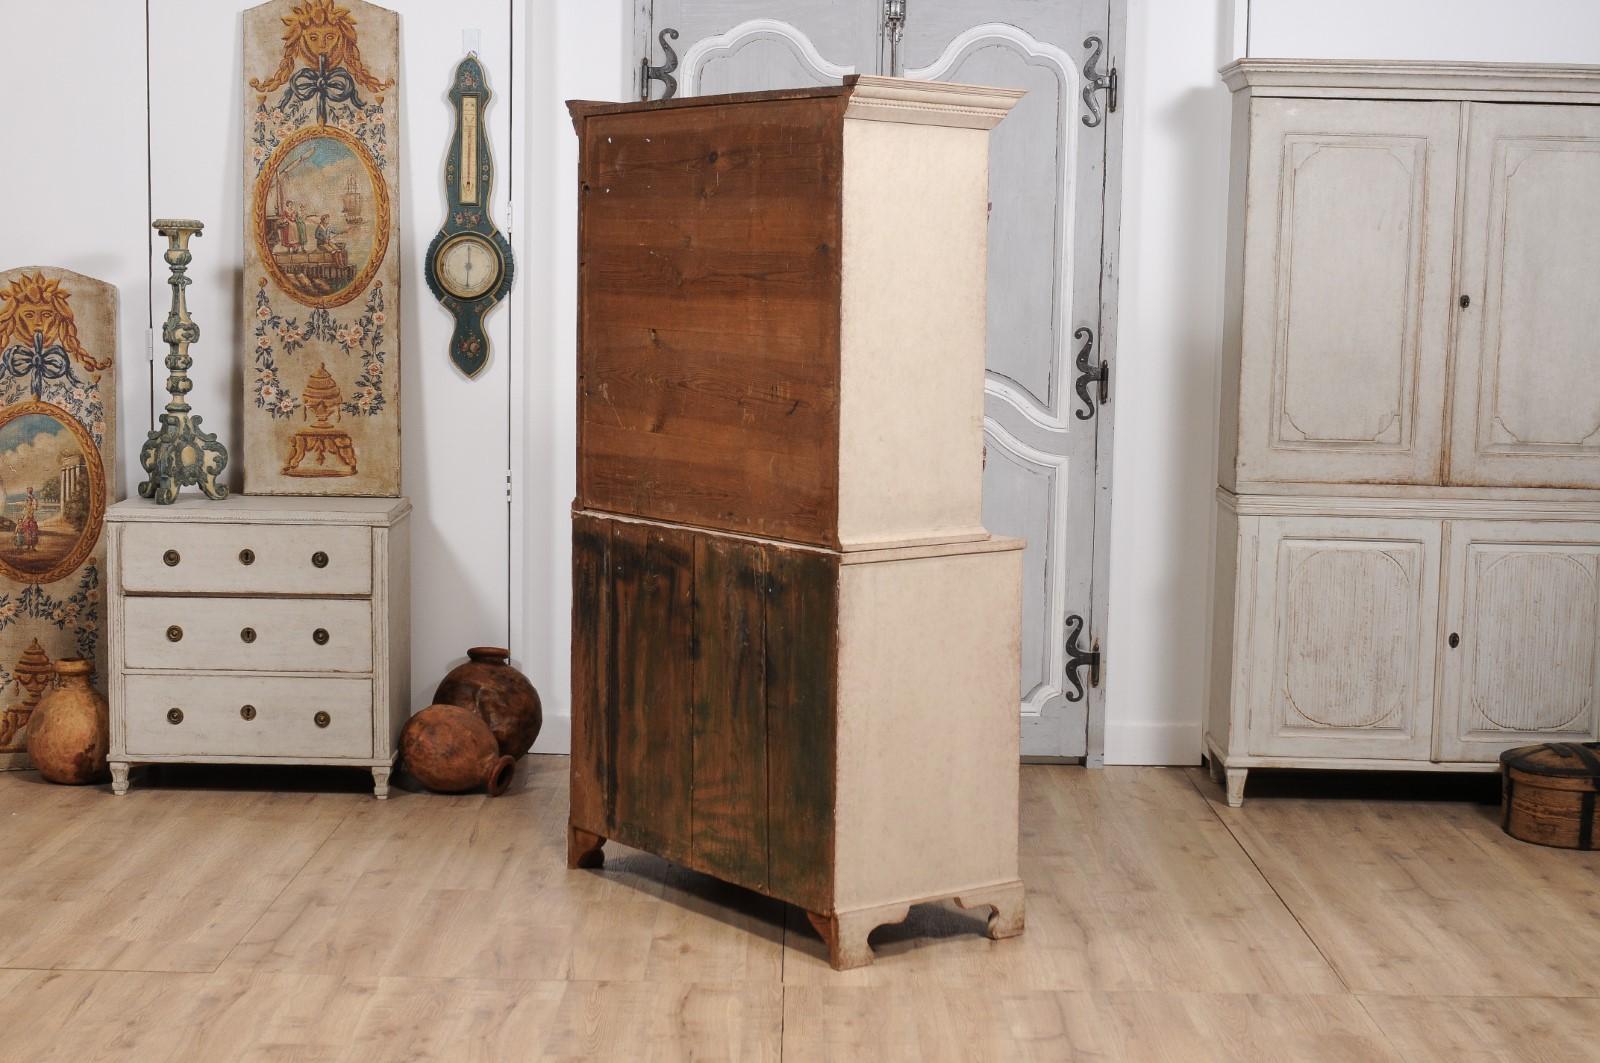 1834 Swedish Two-part Painted Cabinet with Doors and Graduated Drawers For Sale 2